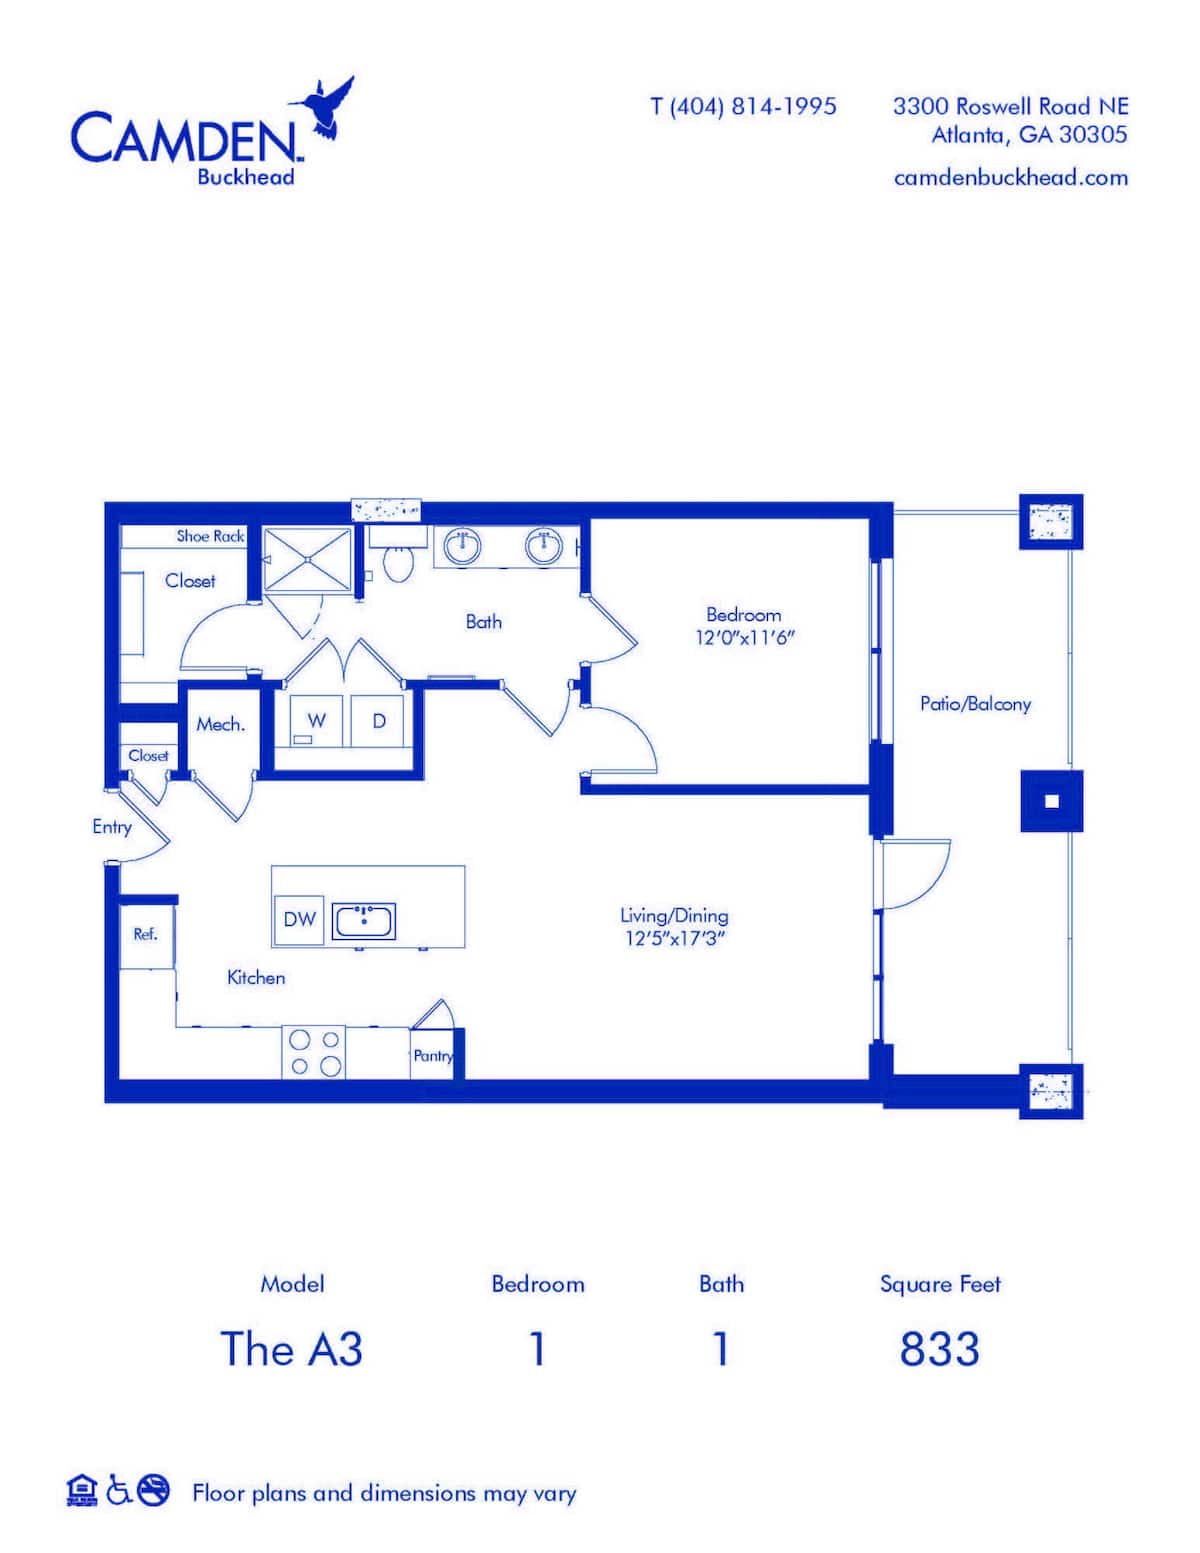 Floorplan diagram for The A3, showing 1 bedroom